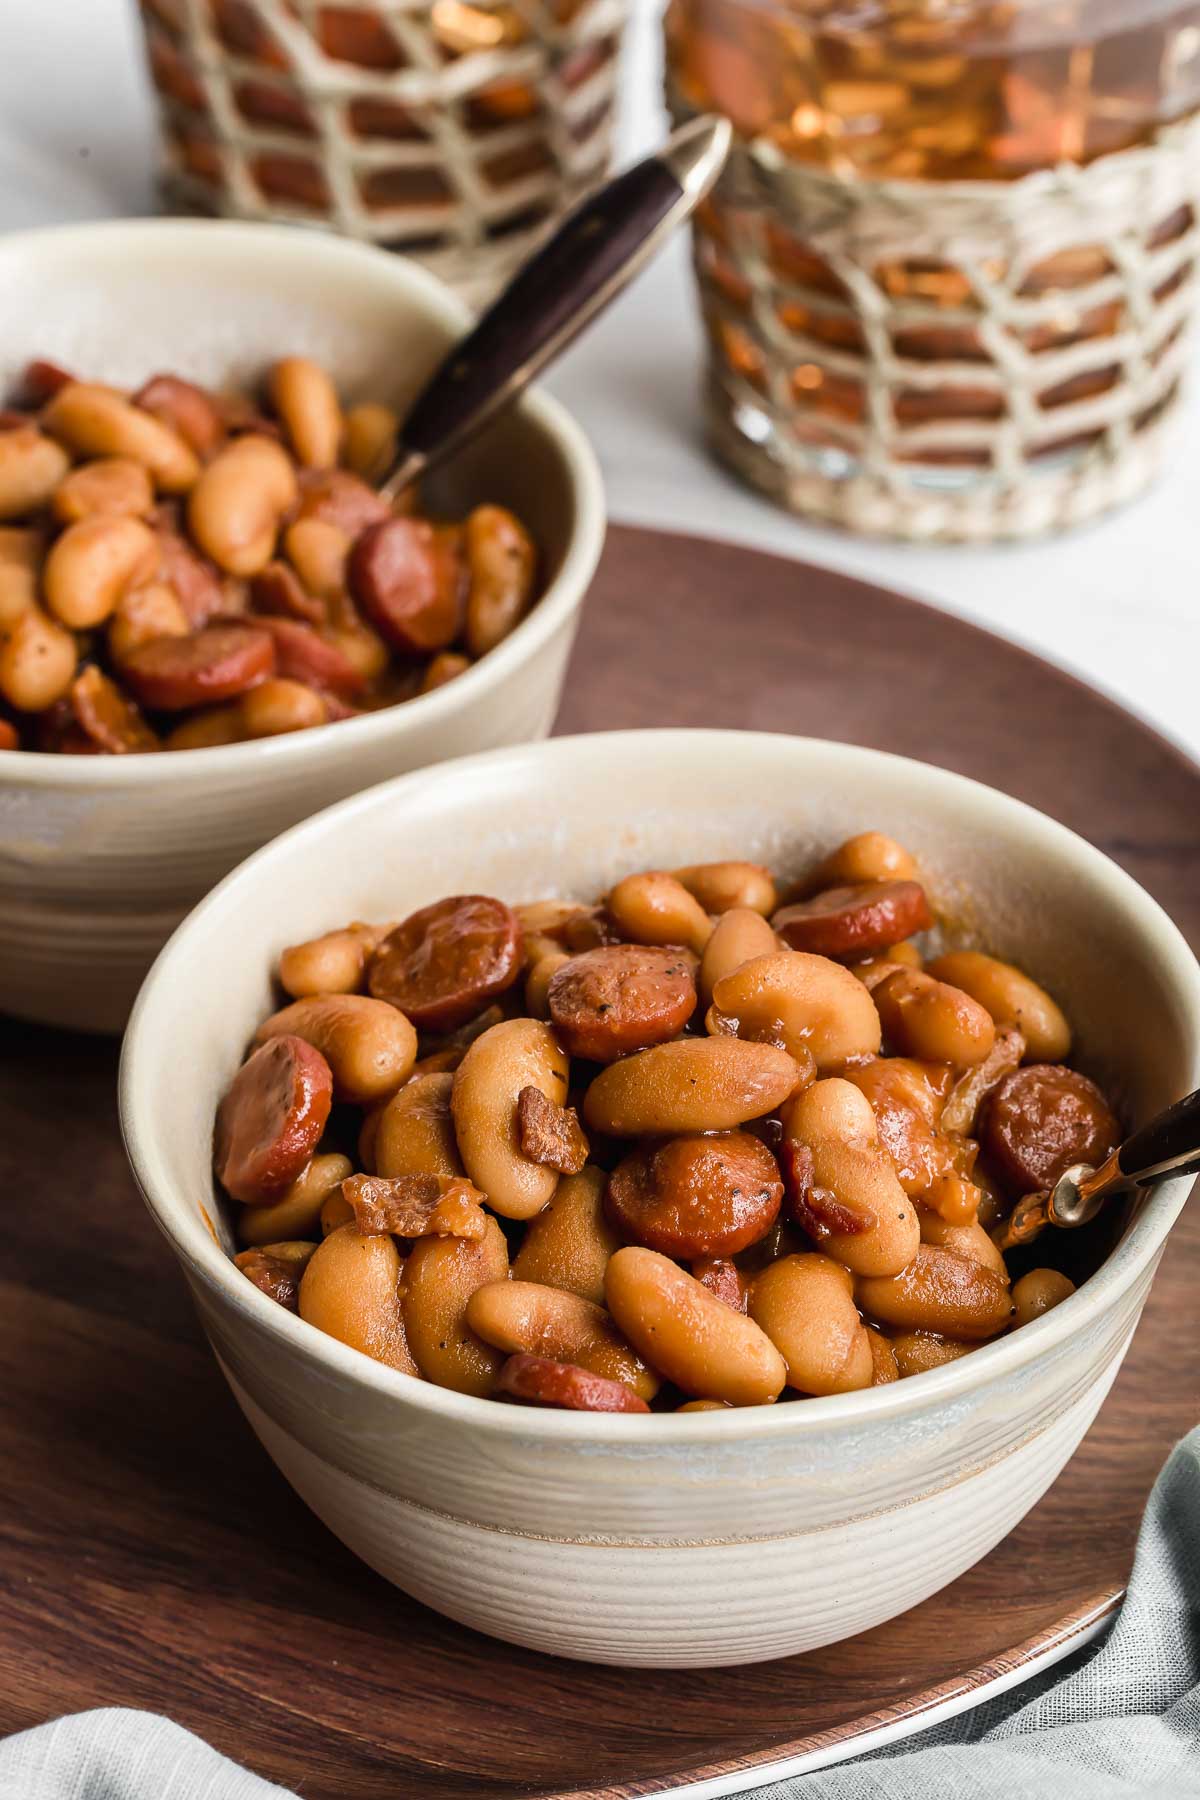 Pork and beans in white bowls with spoon.